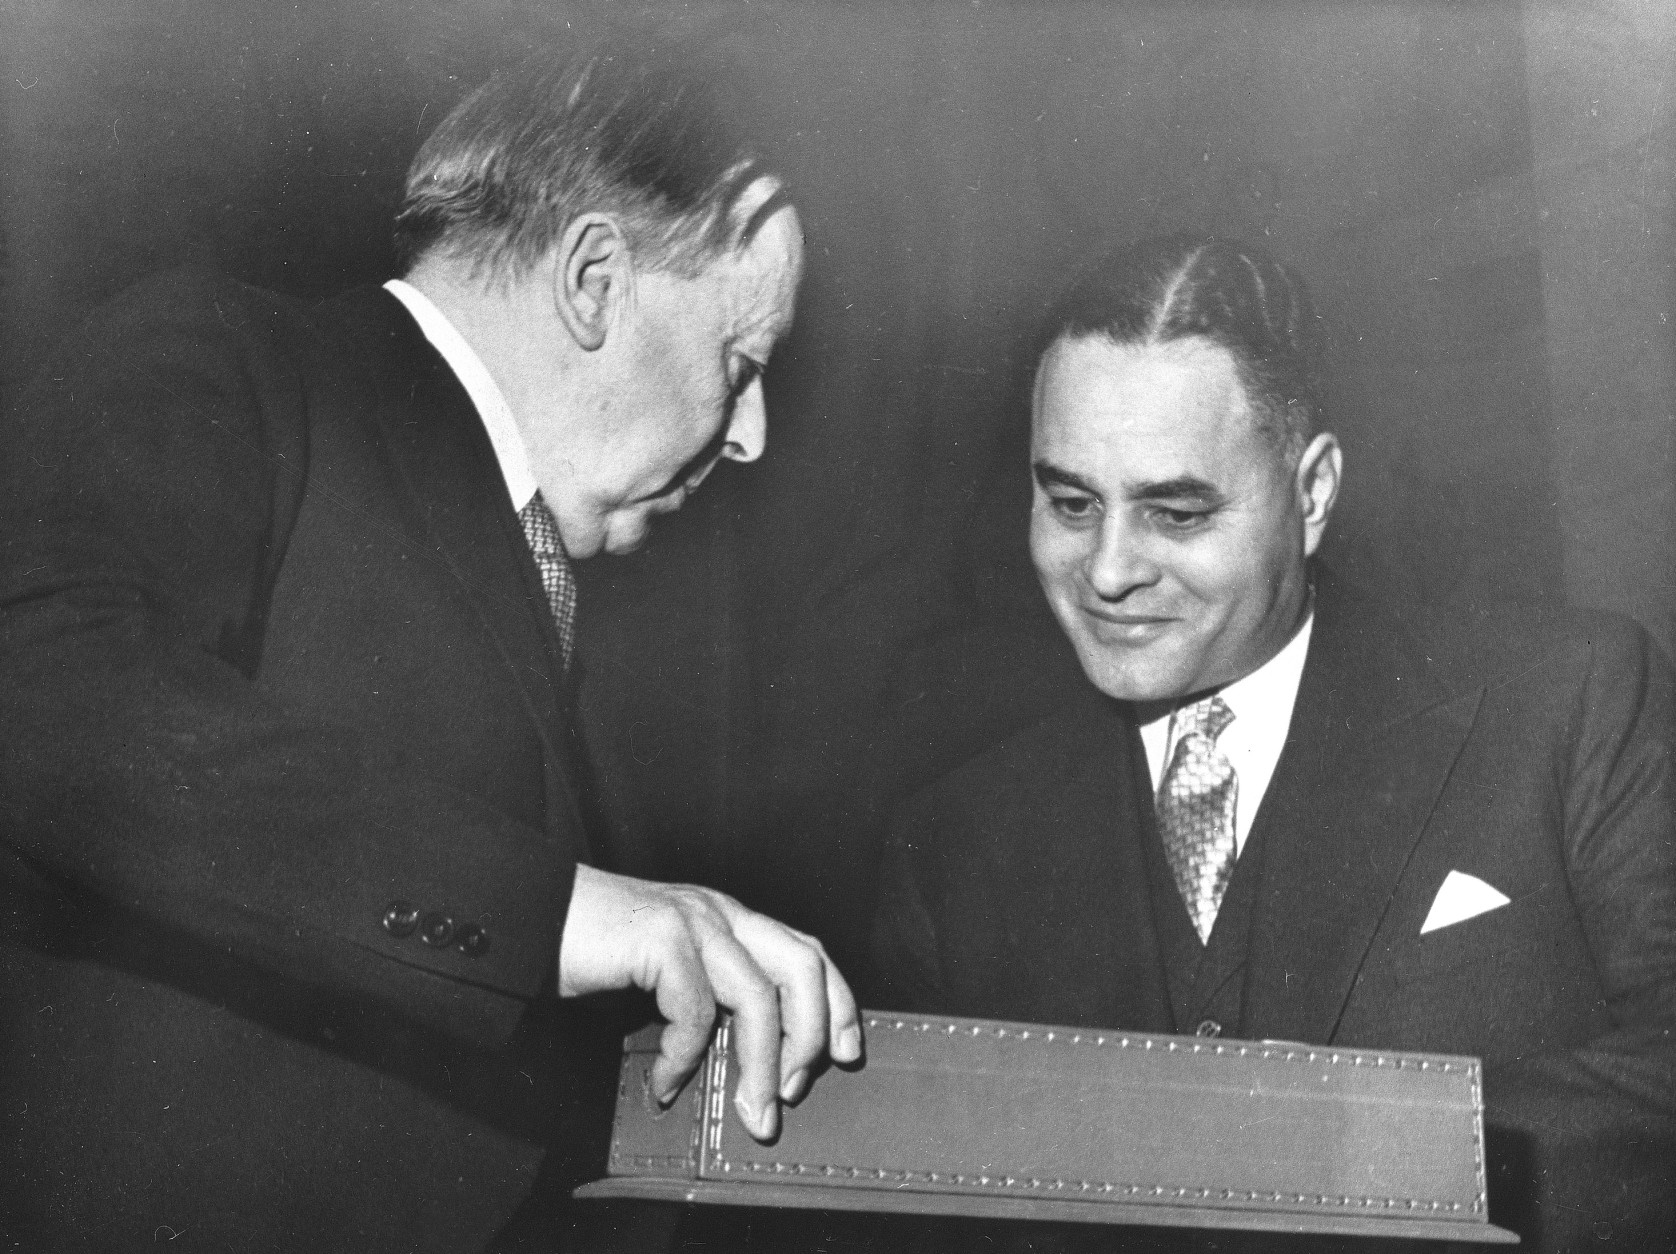 Dr. Ralph J. Bunche, right, is awarded the Nobel Peace Prize diploma, in box, from Gunnar Jahn, chairman of the Nobel Prize Committee, at Oslo University, Norway on Dec. 10, 1950.  Dr. Bunche, the only African-American to be awarded the Nobel Peace Prize, is recognized for his role as United Nations mediator in the peace settlement between Palestinian-Arabs and Jews in 1949.  (AP Photo)